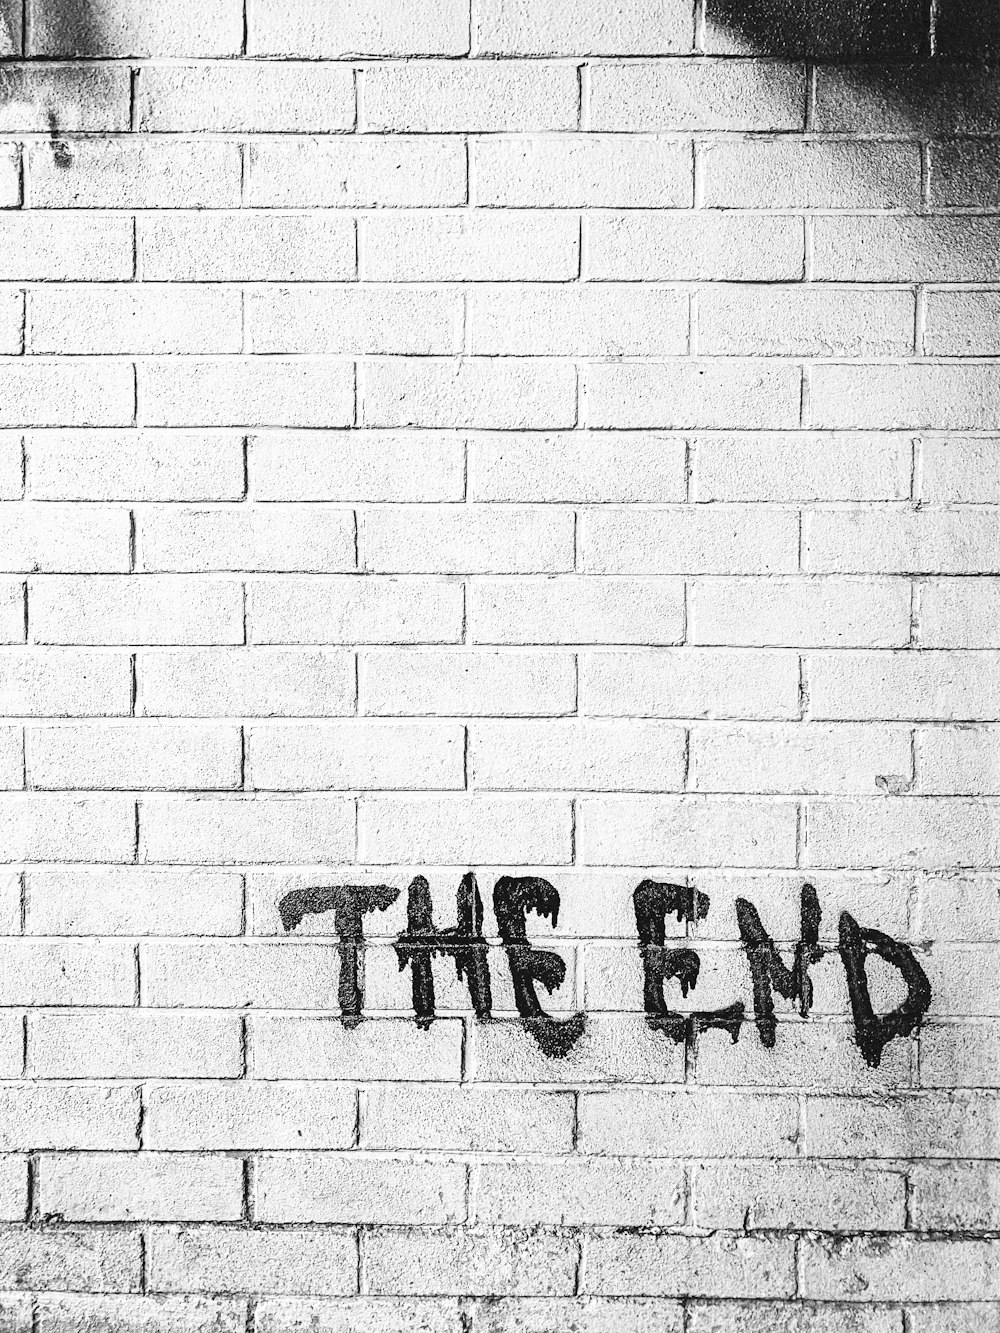 500+ The End Pictures | Download Free Images on Unsplash